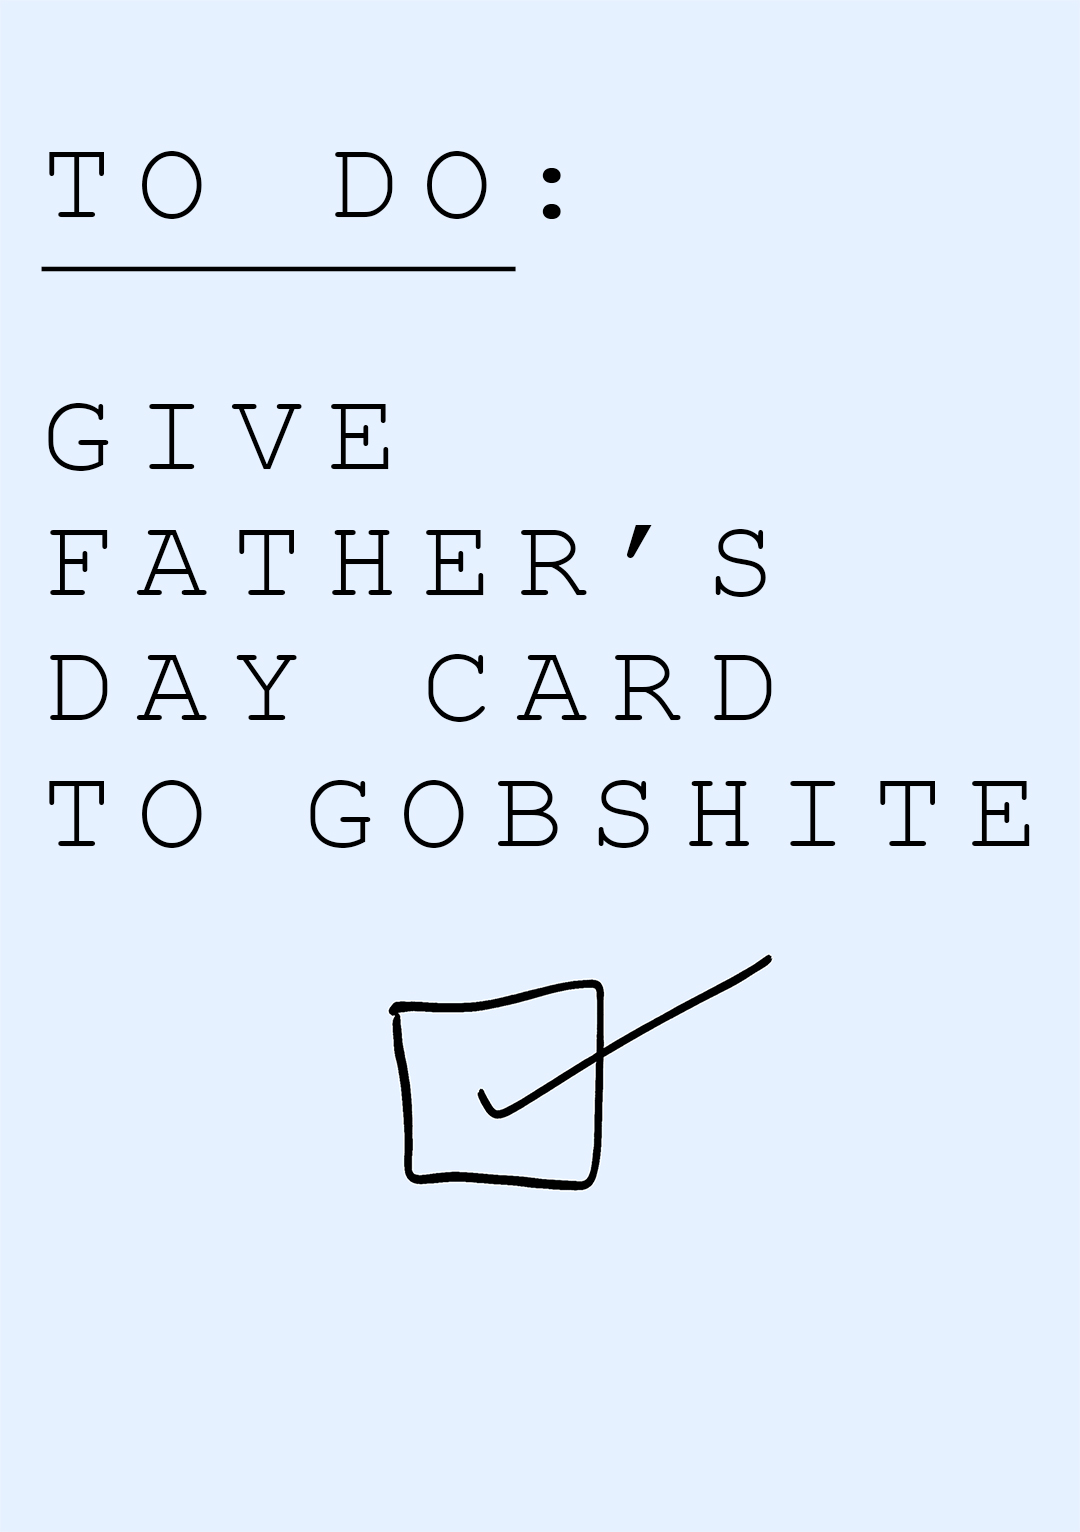 To Do: Give Father's Day Card To Gobshite